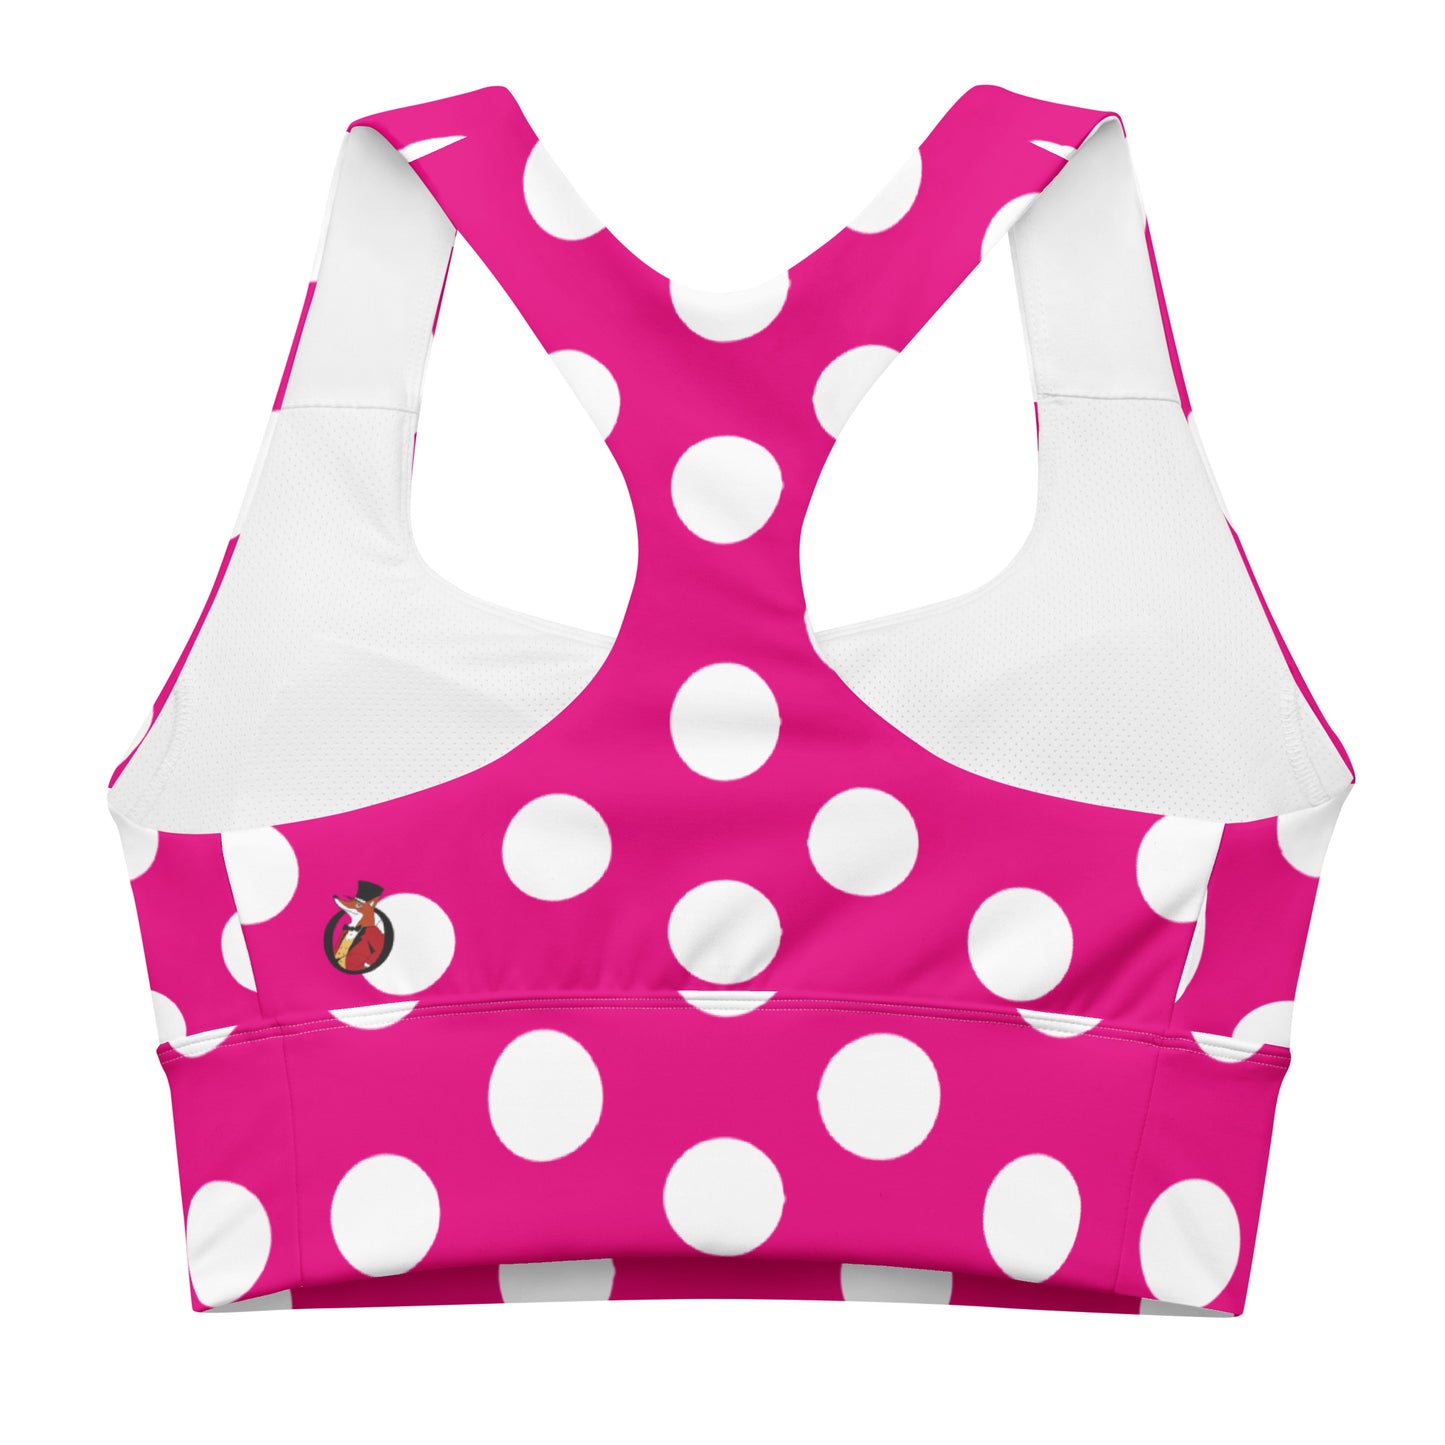 Snooty Fox Art Longline Sports Bra - Summertime Pink with White Polka Dots